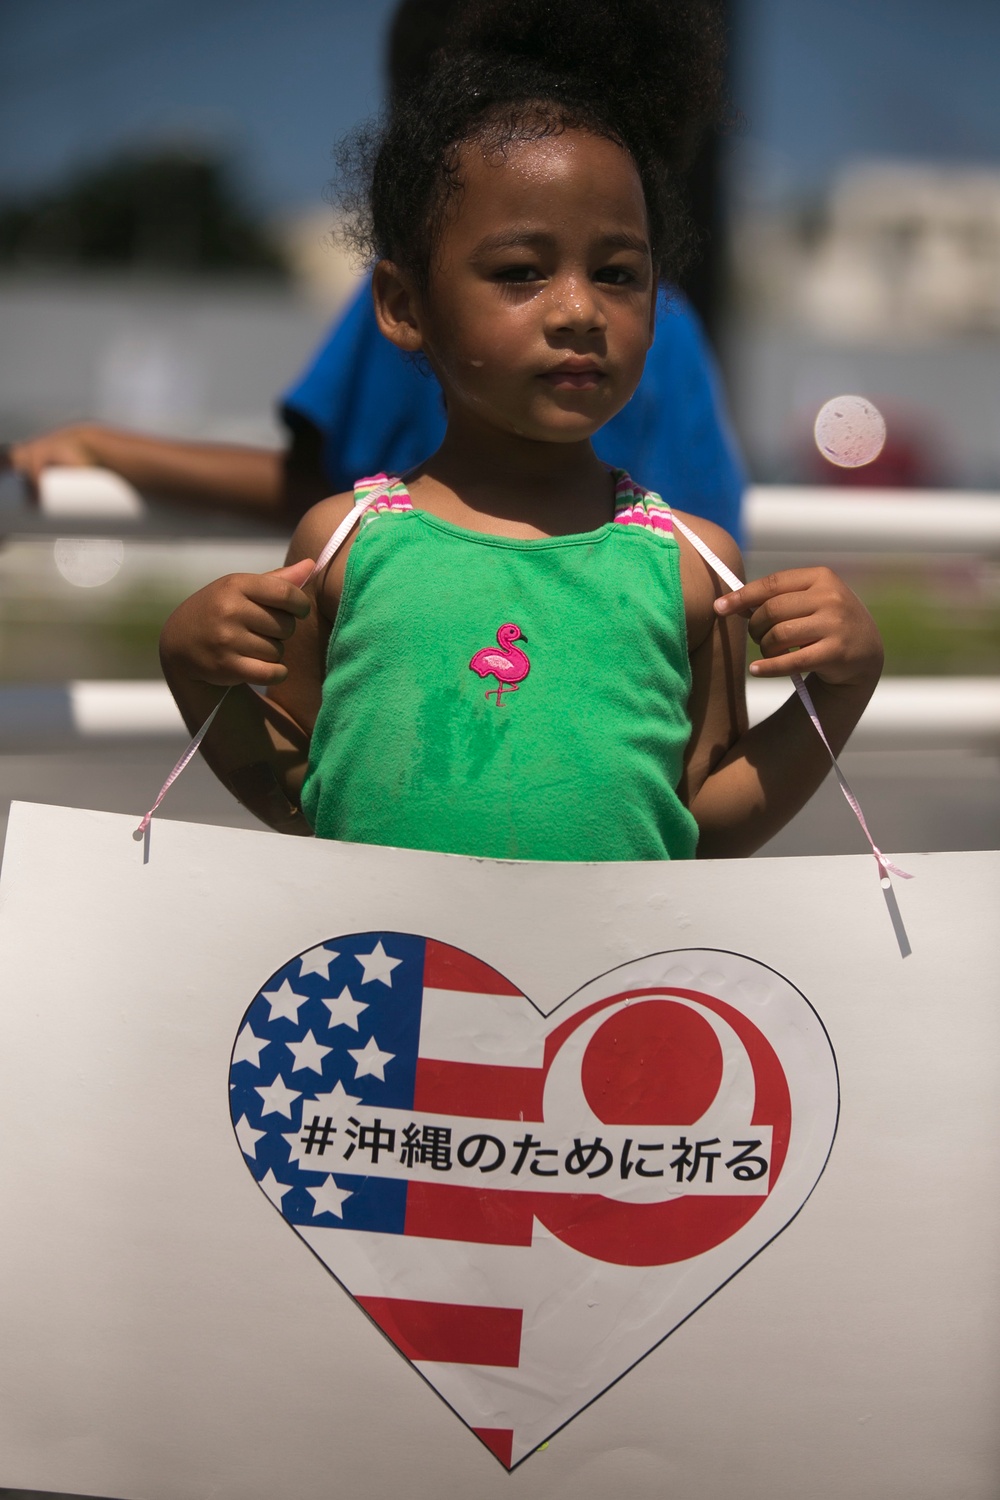 A local Okinawan church shows support during period of unity and mourning